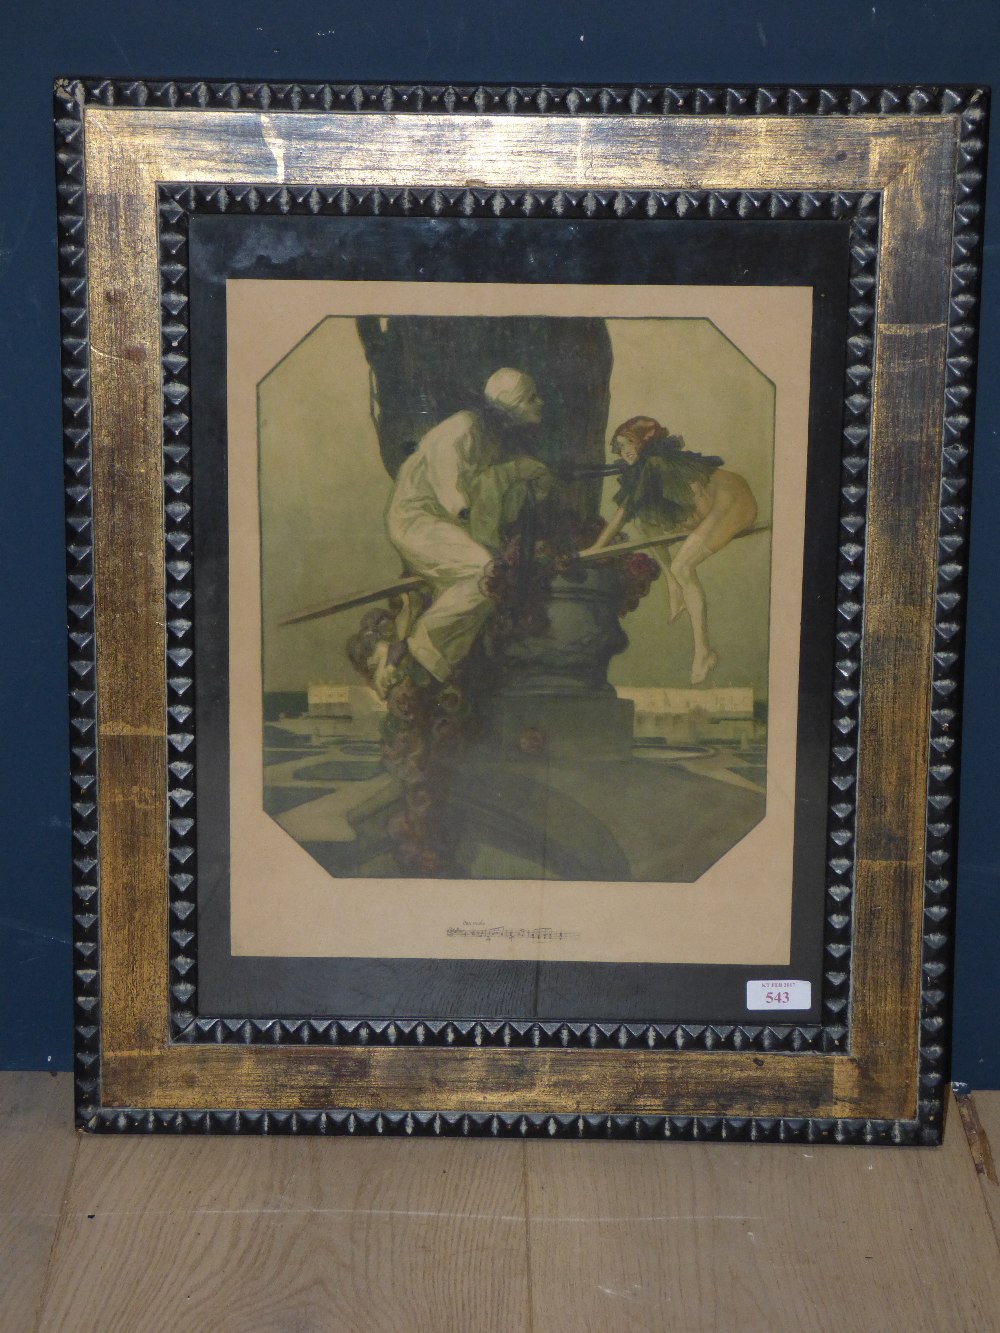 Early C20th romantic lithograph portrait of Pierrot and a female companion PLEASE always check